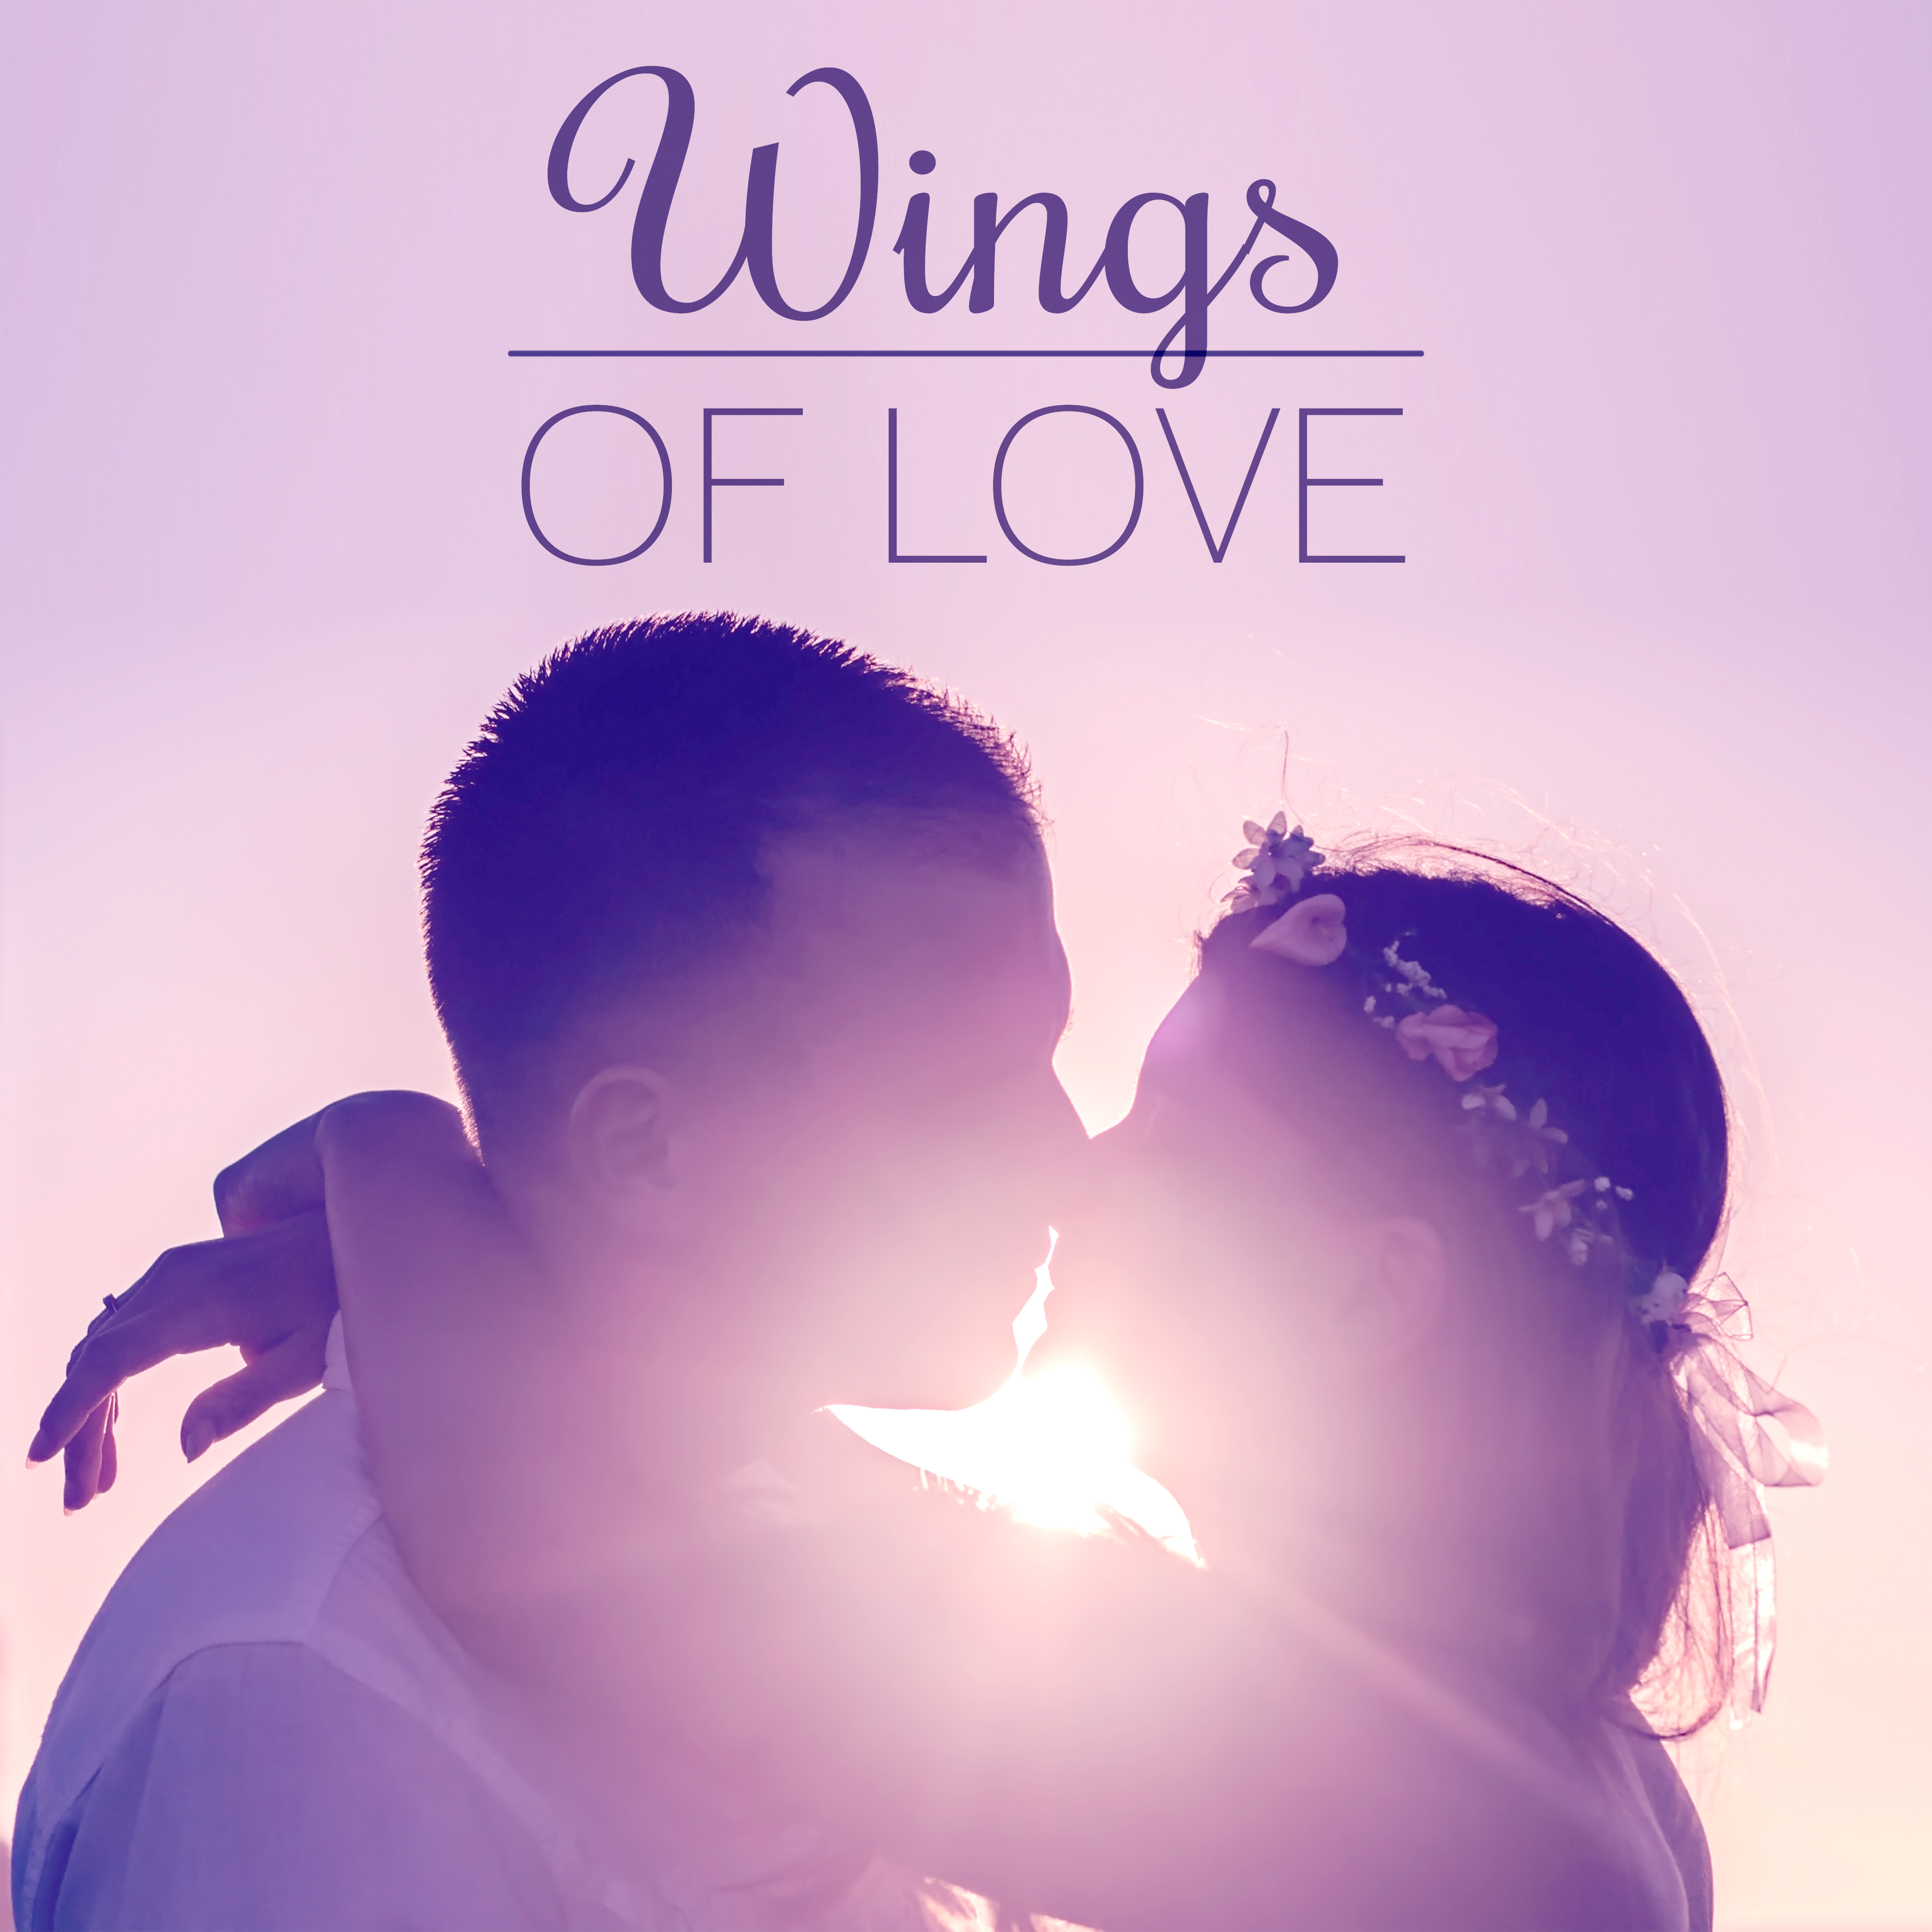 Wings of Love - Love Lovers, Betrayed Love, Beloved Date, Bouquet of Myosotis, Love Not Sleep, Only You, Common Days, For all Lovers